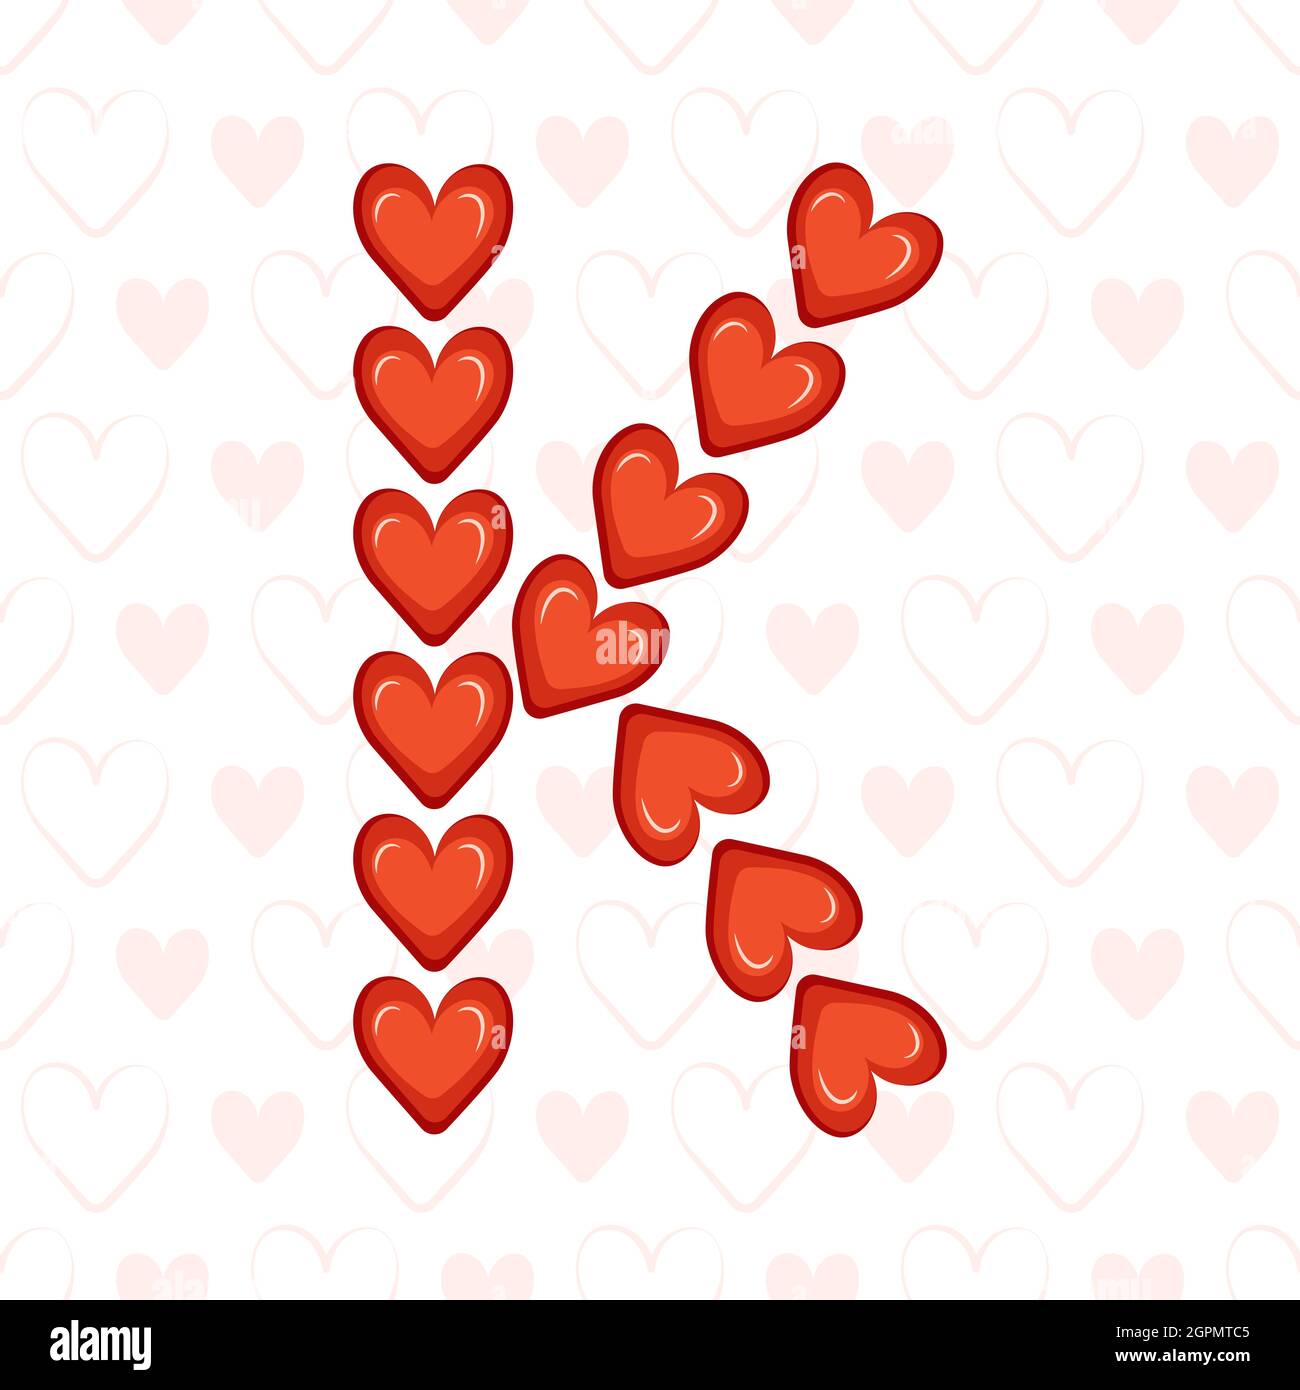 K love Cut Out Stock Images & Pictures - Alamy